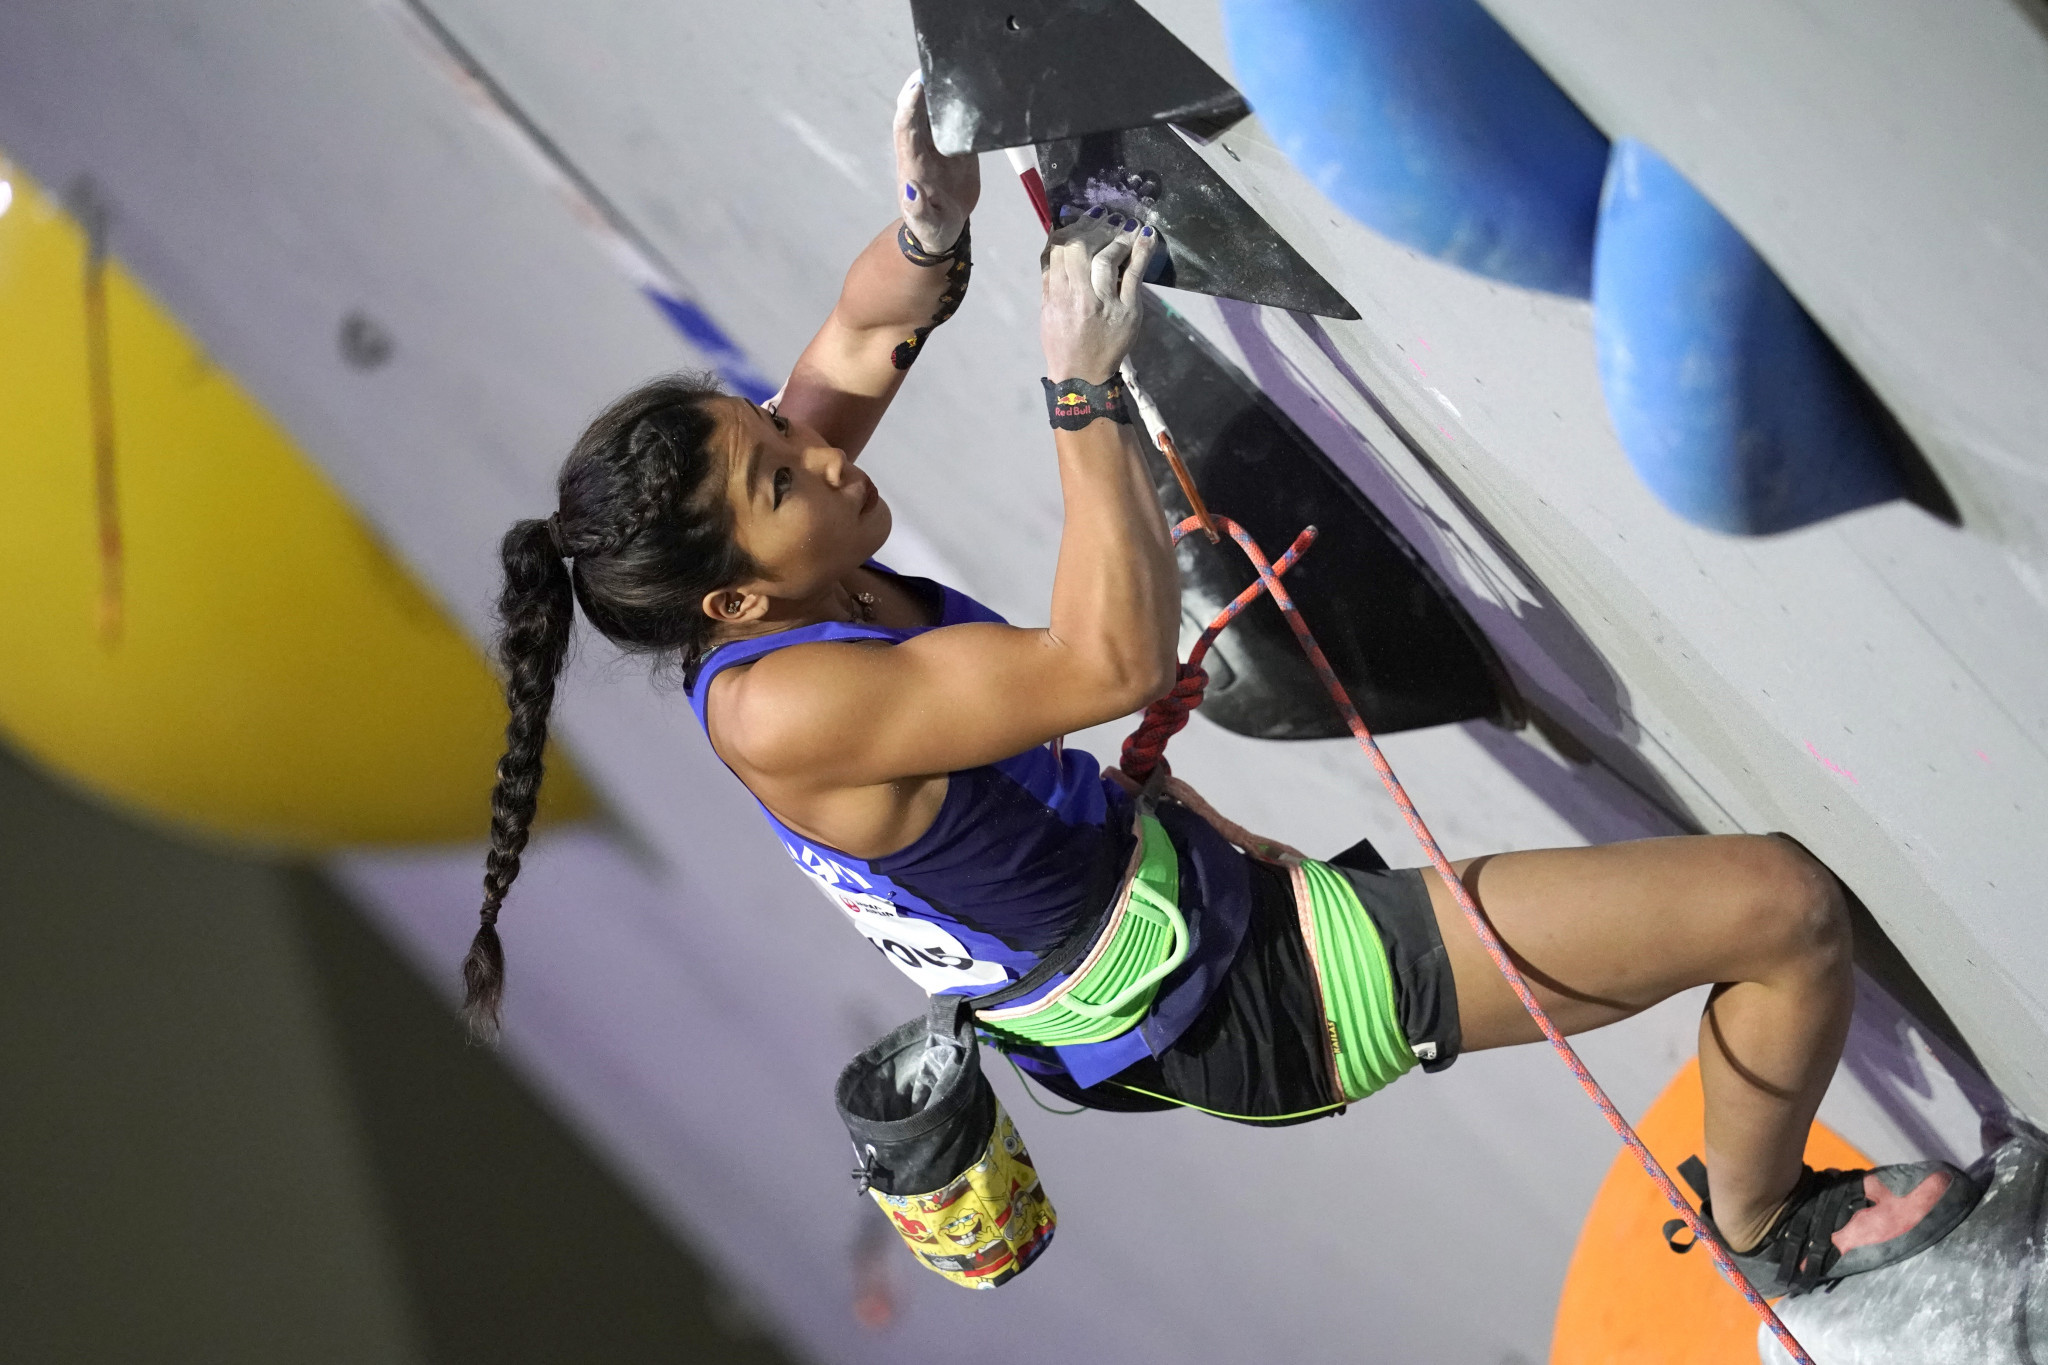 Miho Nonaka is set to compete at next year's Olympics on home soil after being confirmed as one of Japan's four sport climbers who have qualified for Tokyo 2020 ©Getty Images